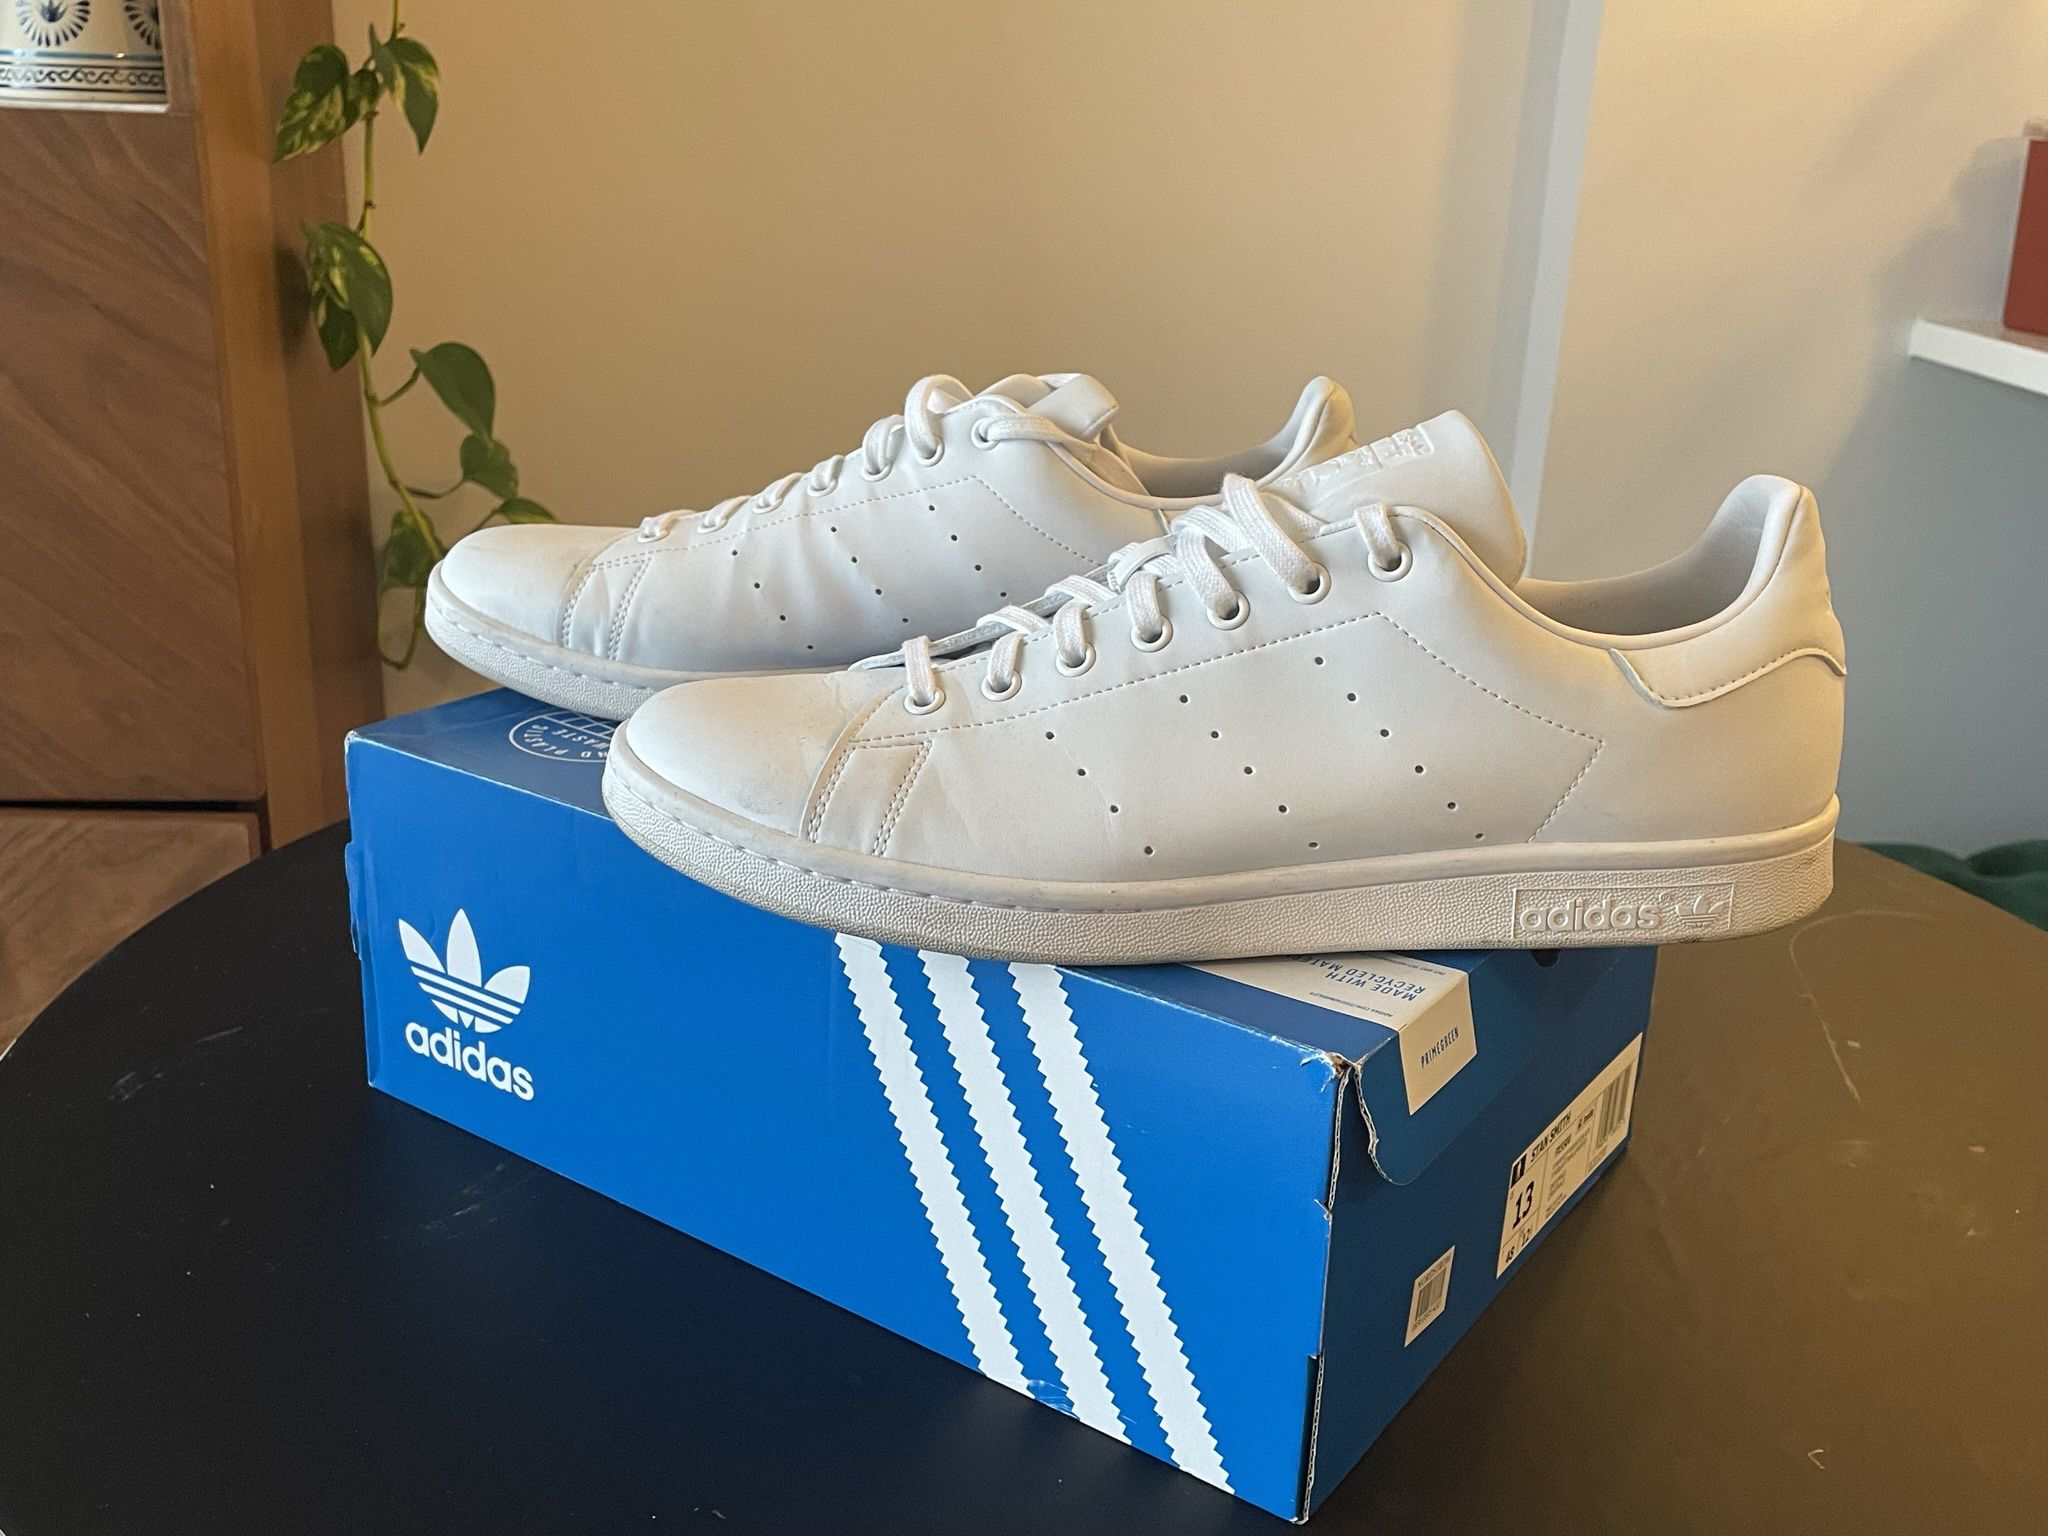 White Stan Smith Adidas size 13 Sale in New York, NY OfferUp